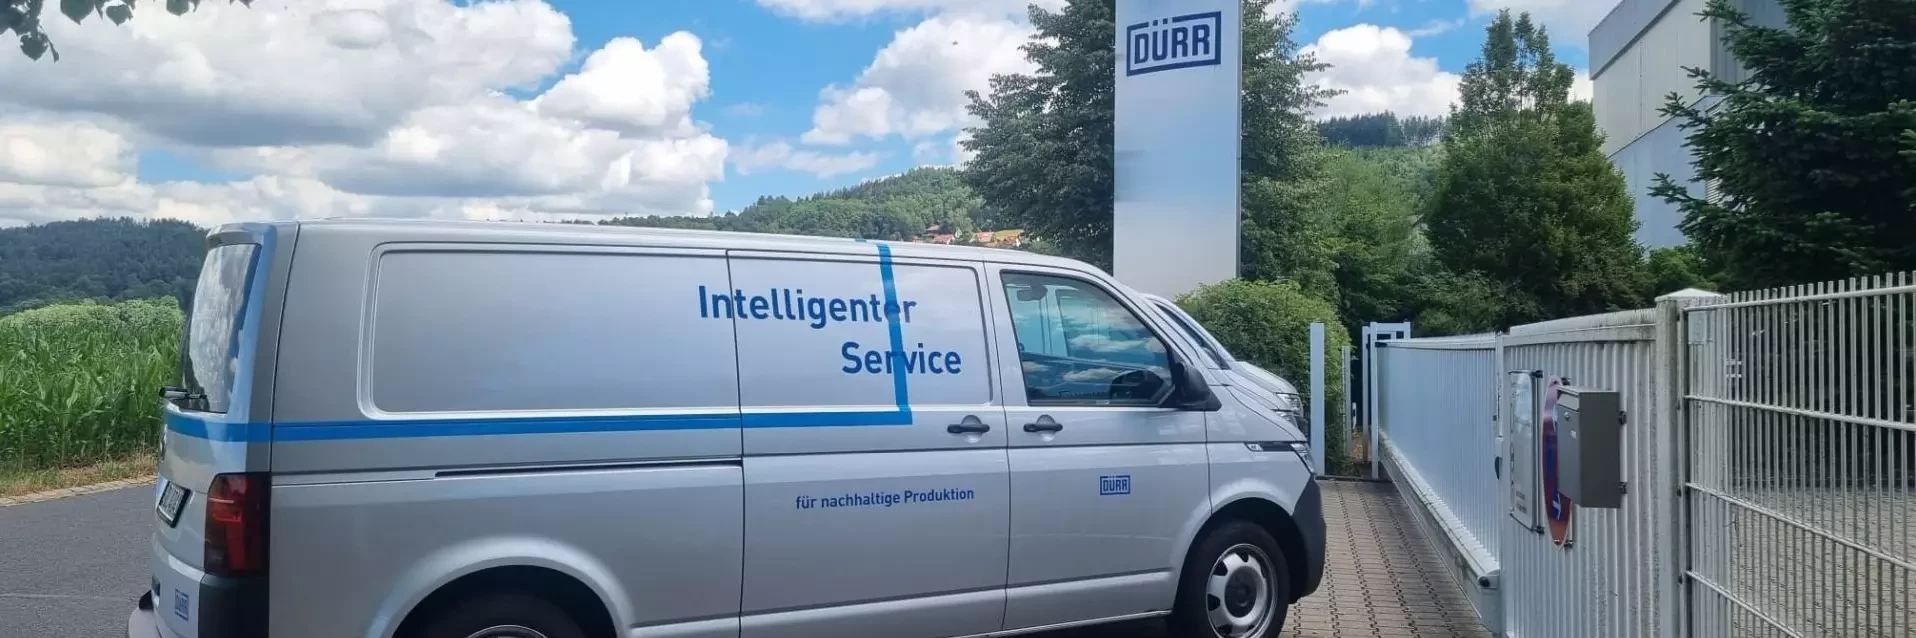 The durr service vehicles received a new design